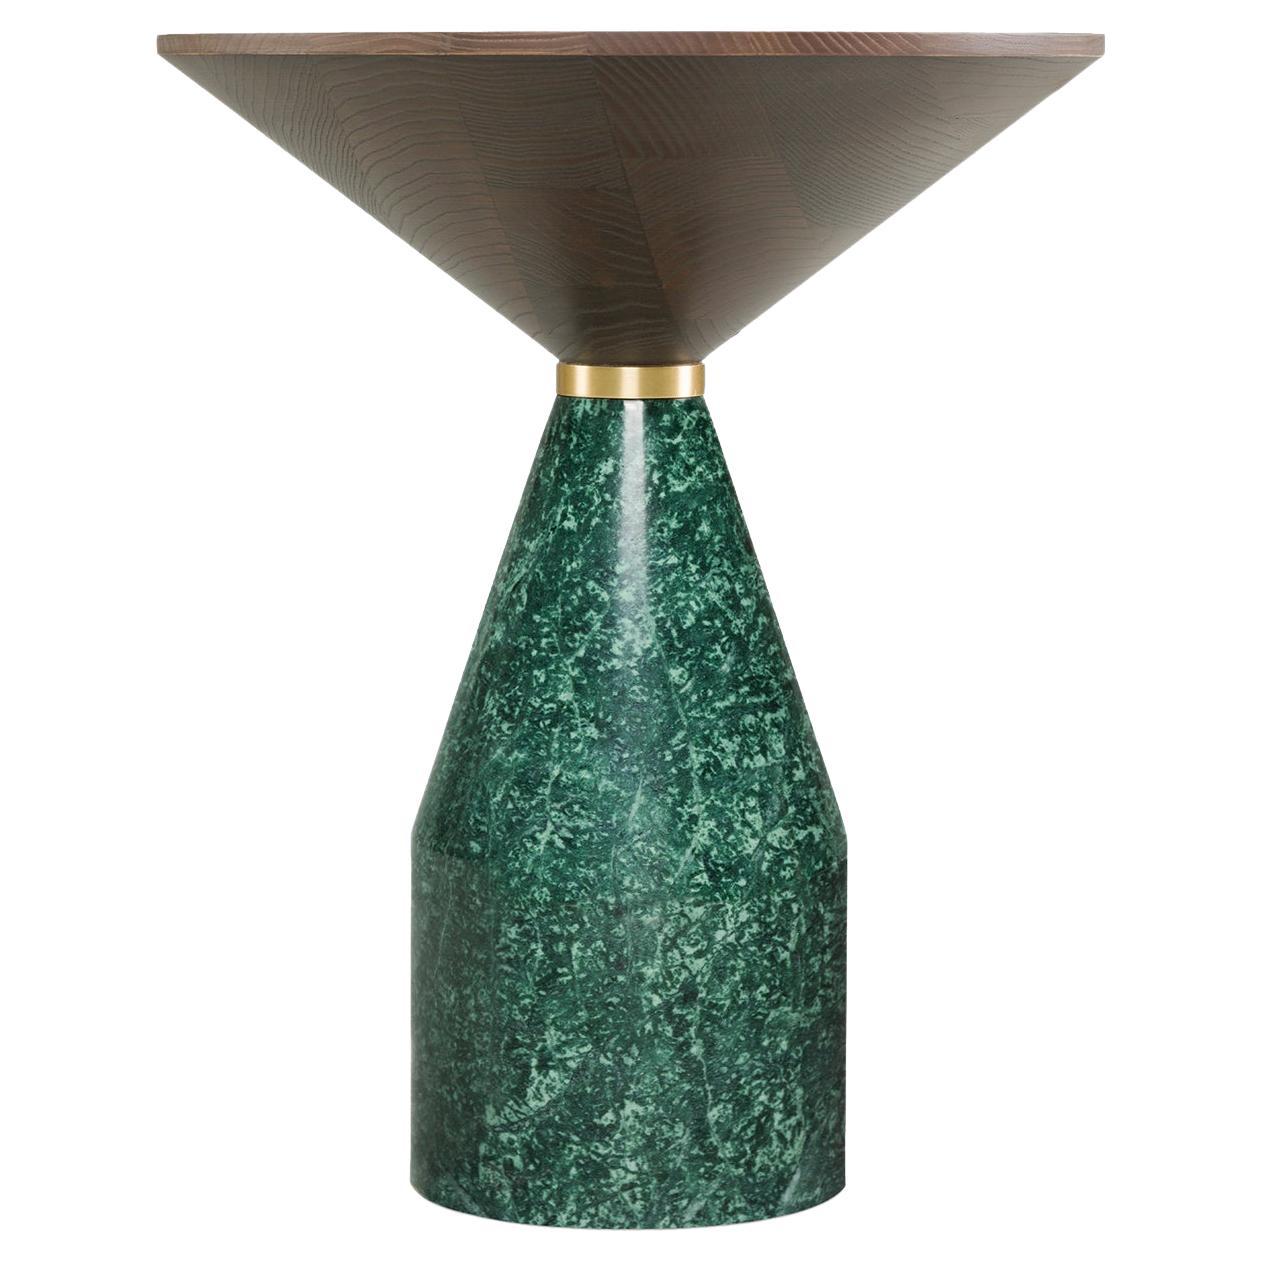 Cino Small Green Marble Table For Sale